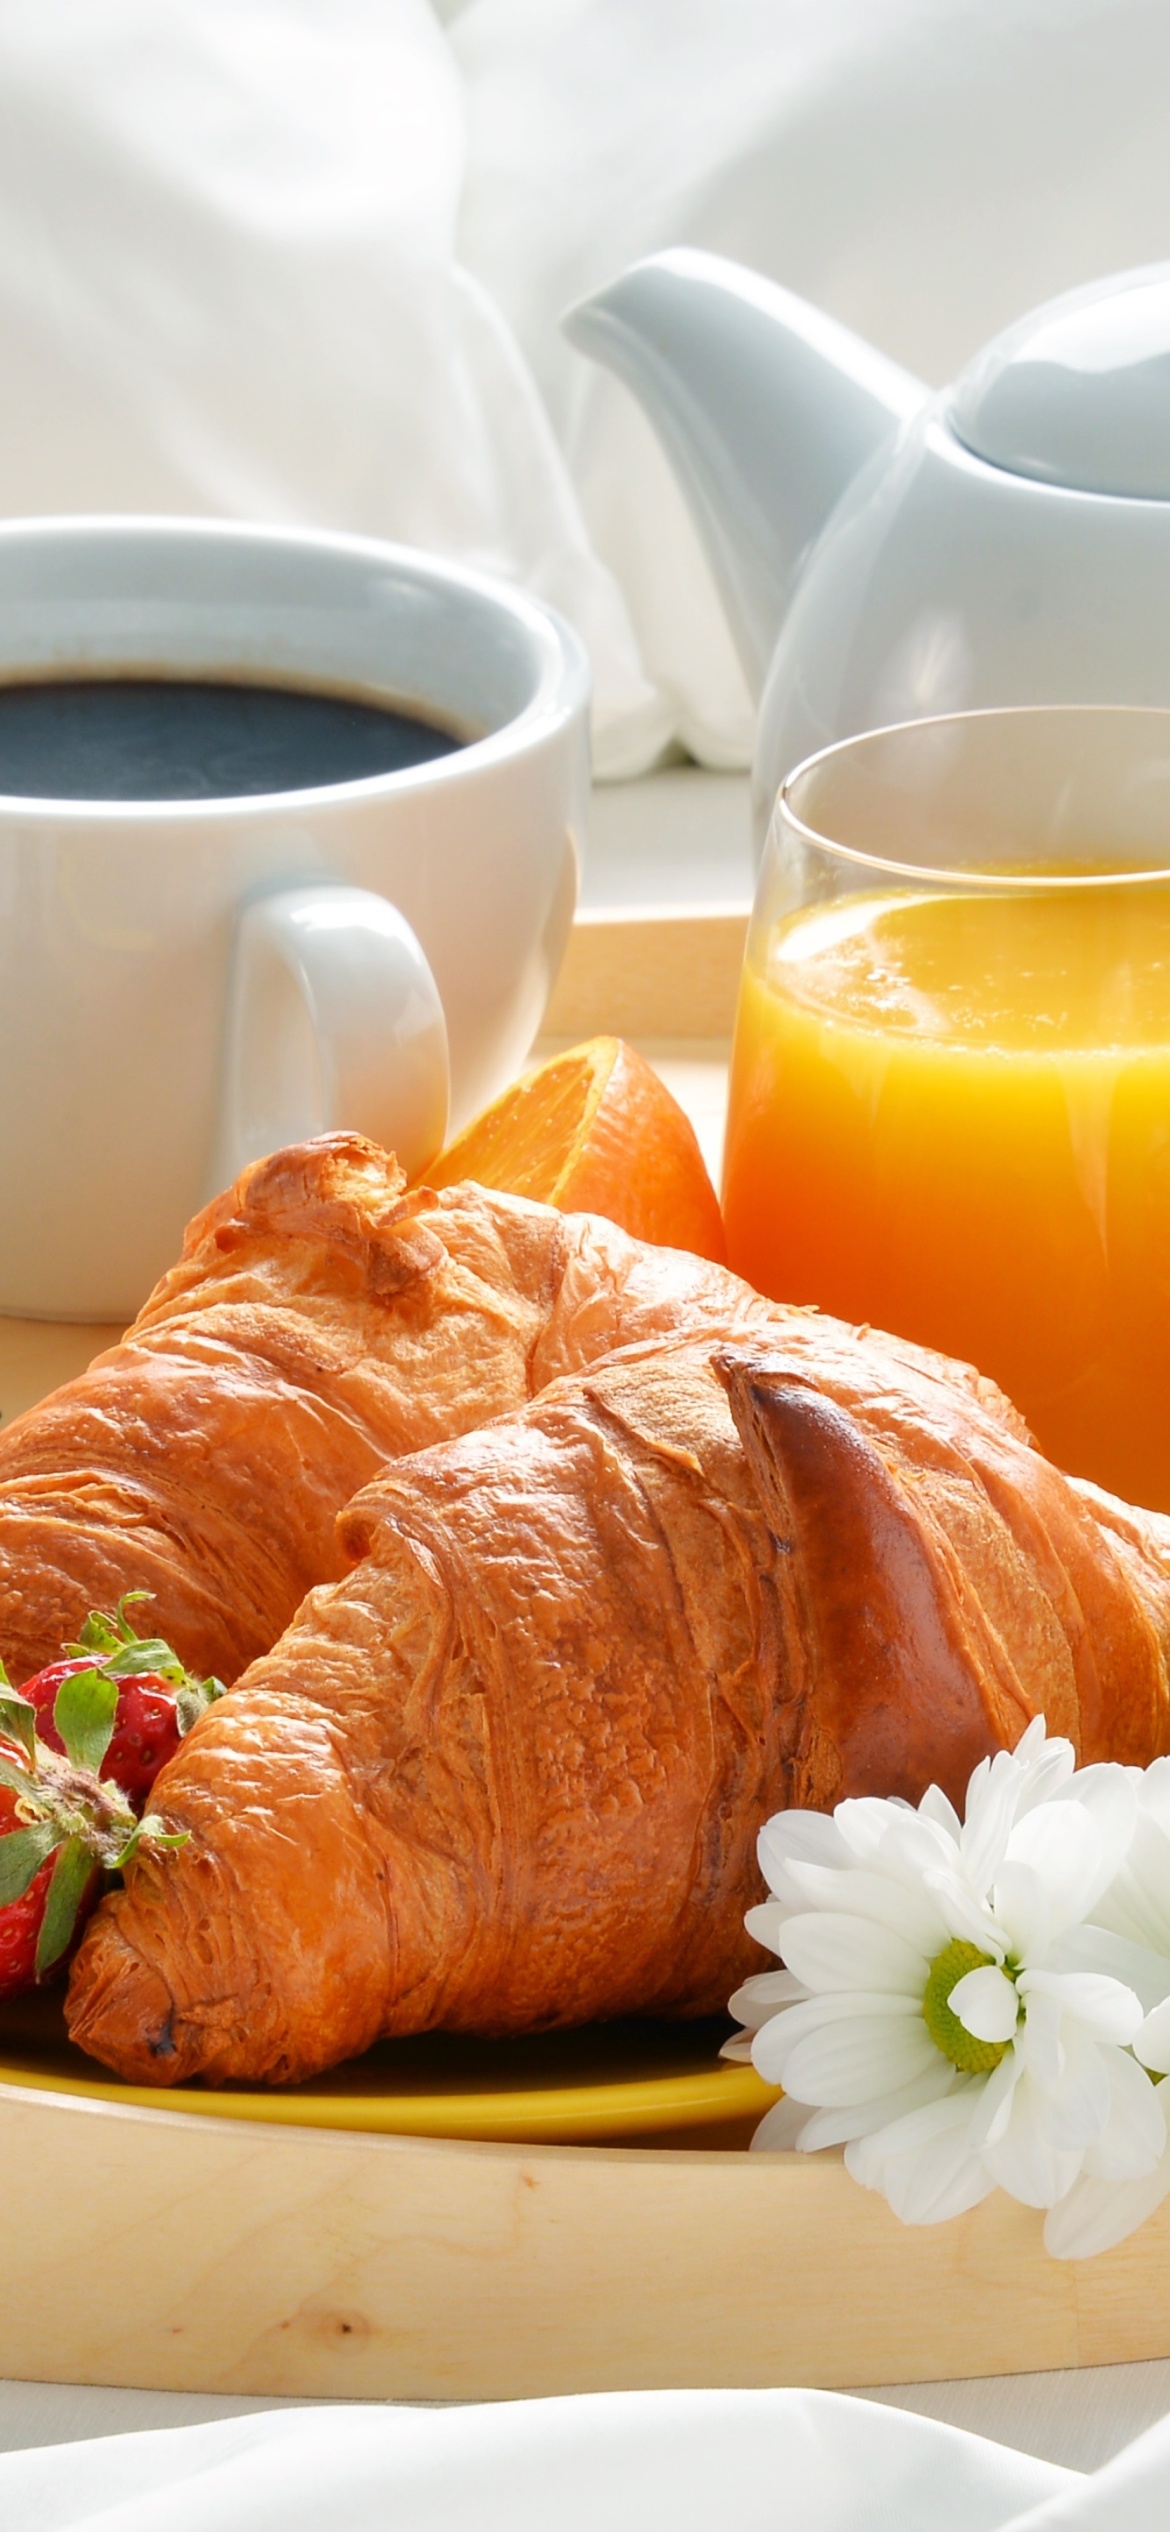 Das Breakfast with croissant and musli Wallpaper 1170x2532